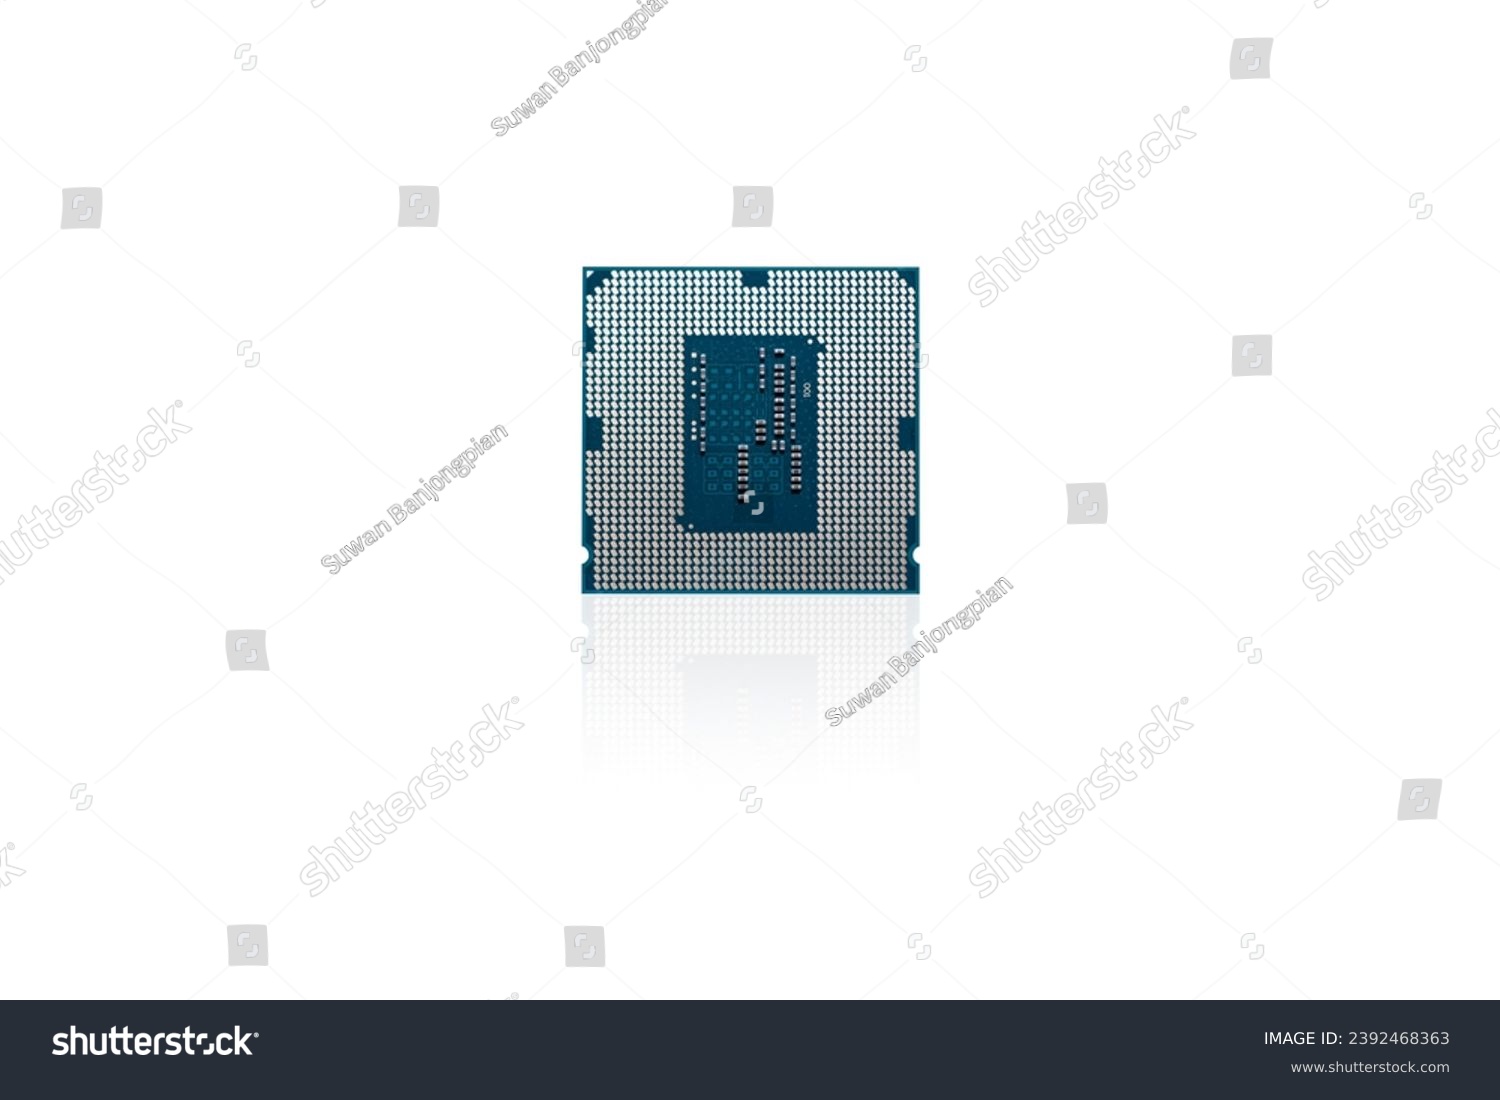 CPU Central Processor Unit for personal computer on isolated white background with reflection. #2392468363